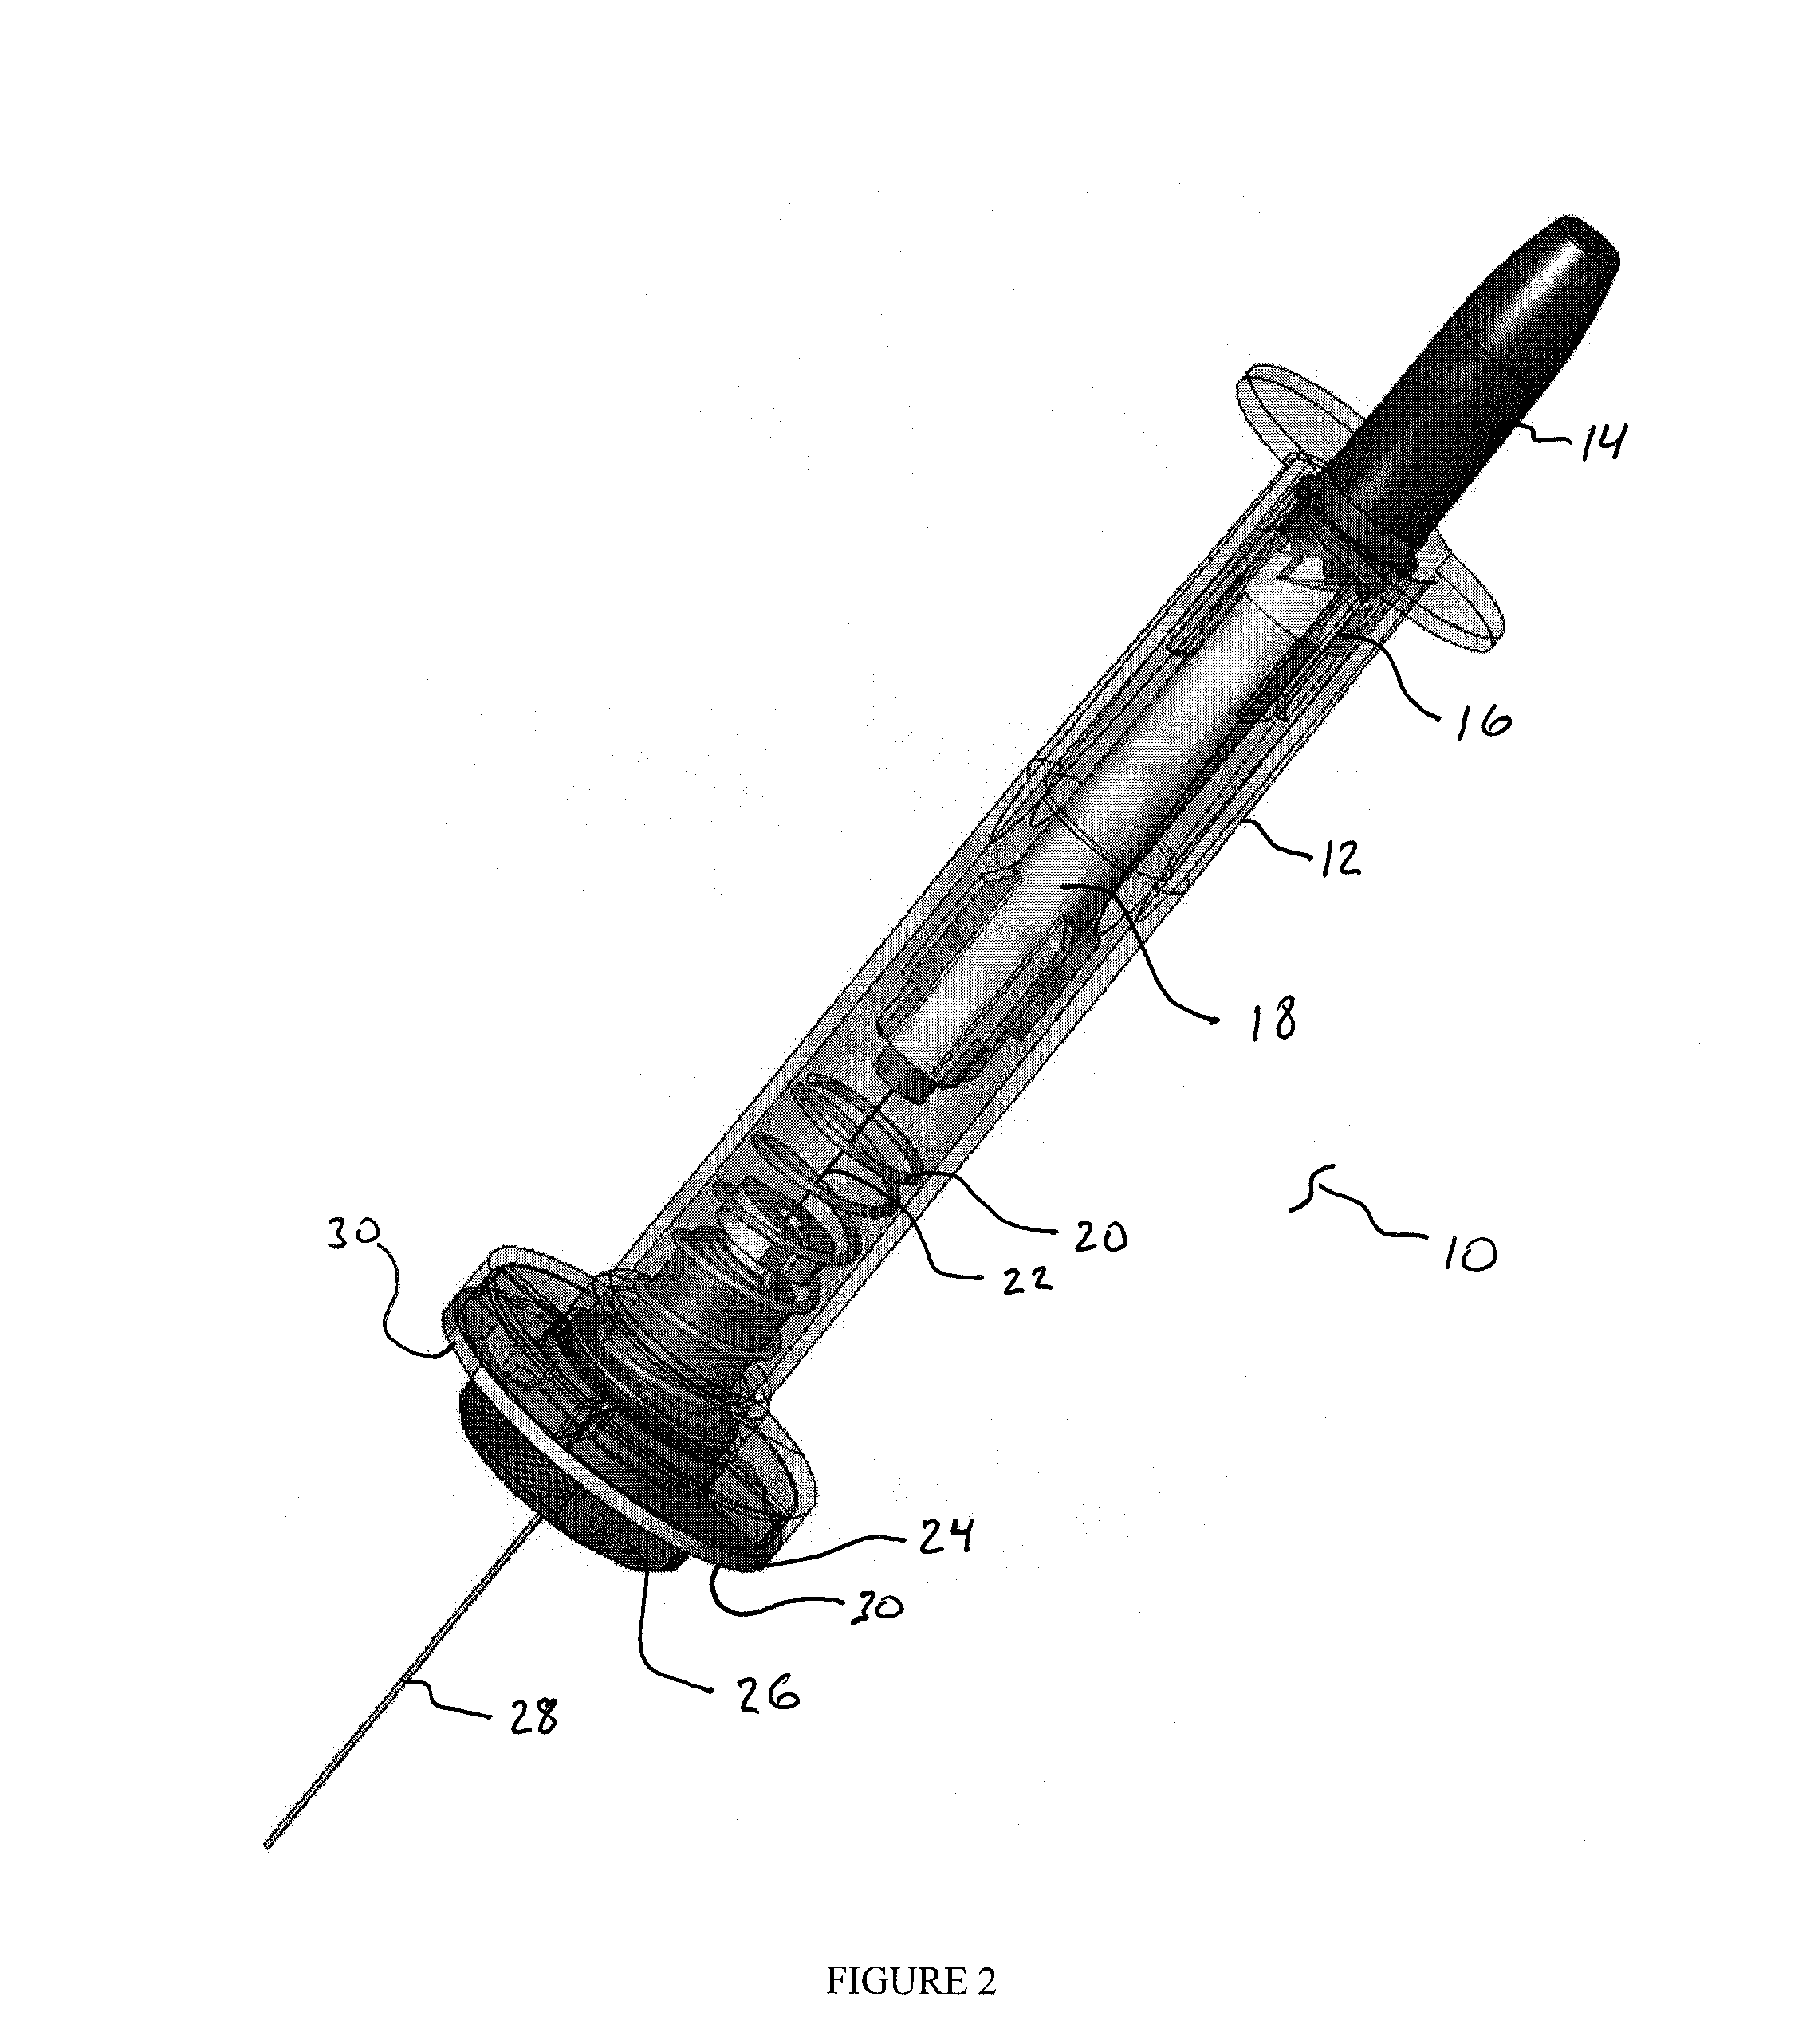 Single-hand operated syringe-like device that provides electronic chain of custody when securing a sample for analysis